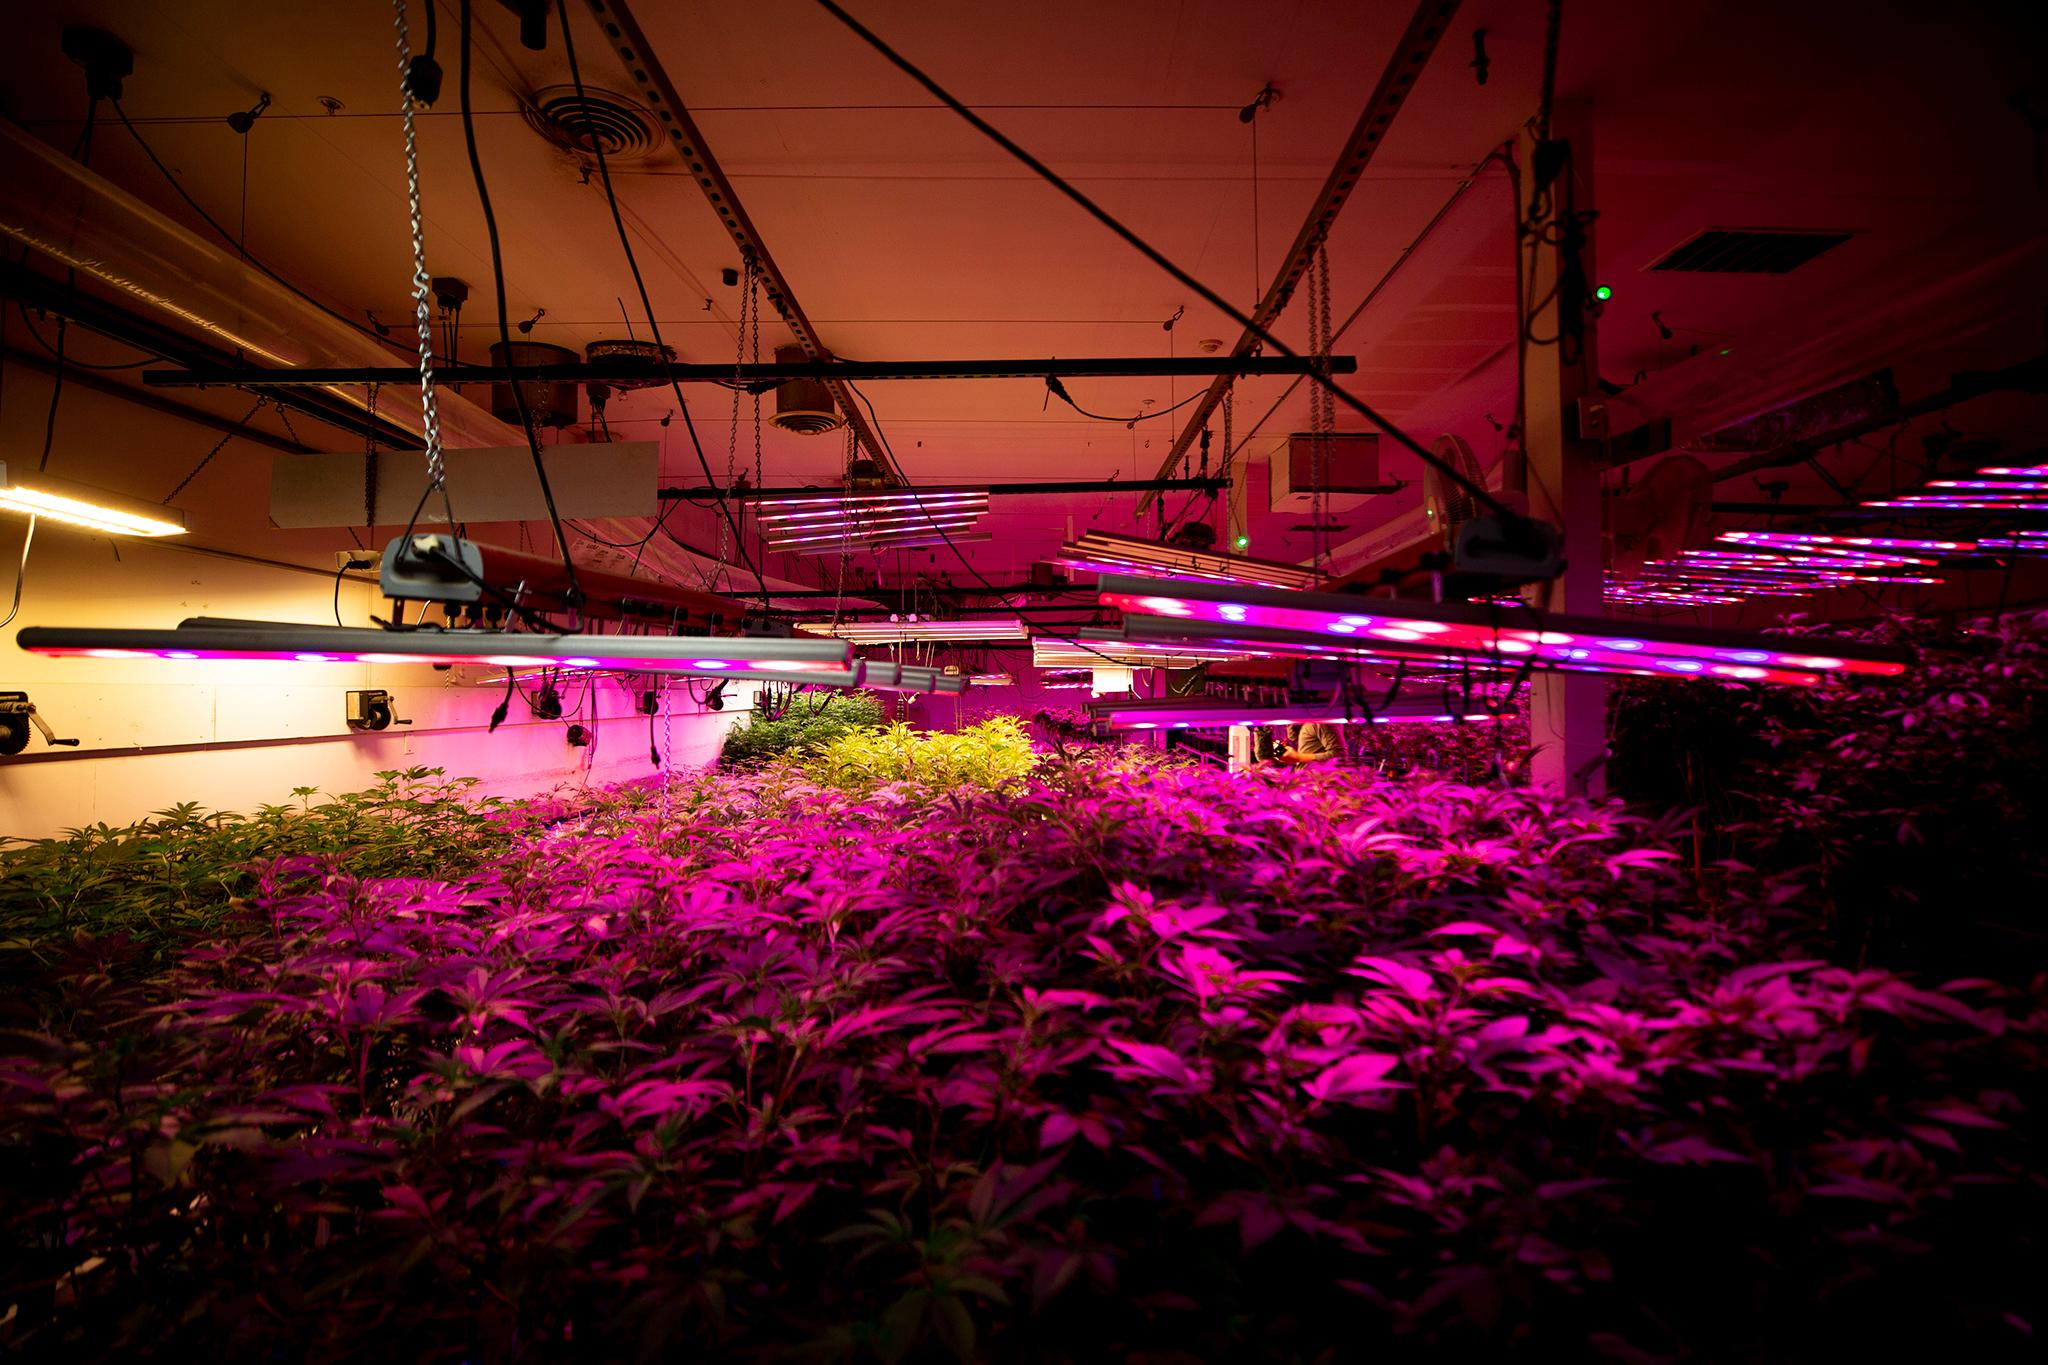 Marijuana grows in The Clinic's warehouse in Denver's Overland neighborhood. Tubes running across the ceiling carry carbon dioxide. March 19, 2021.